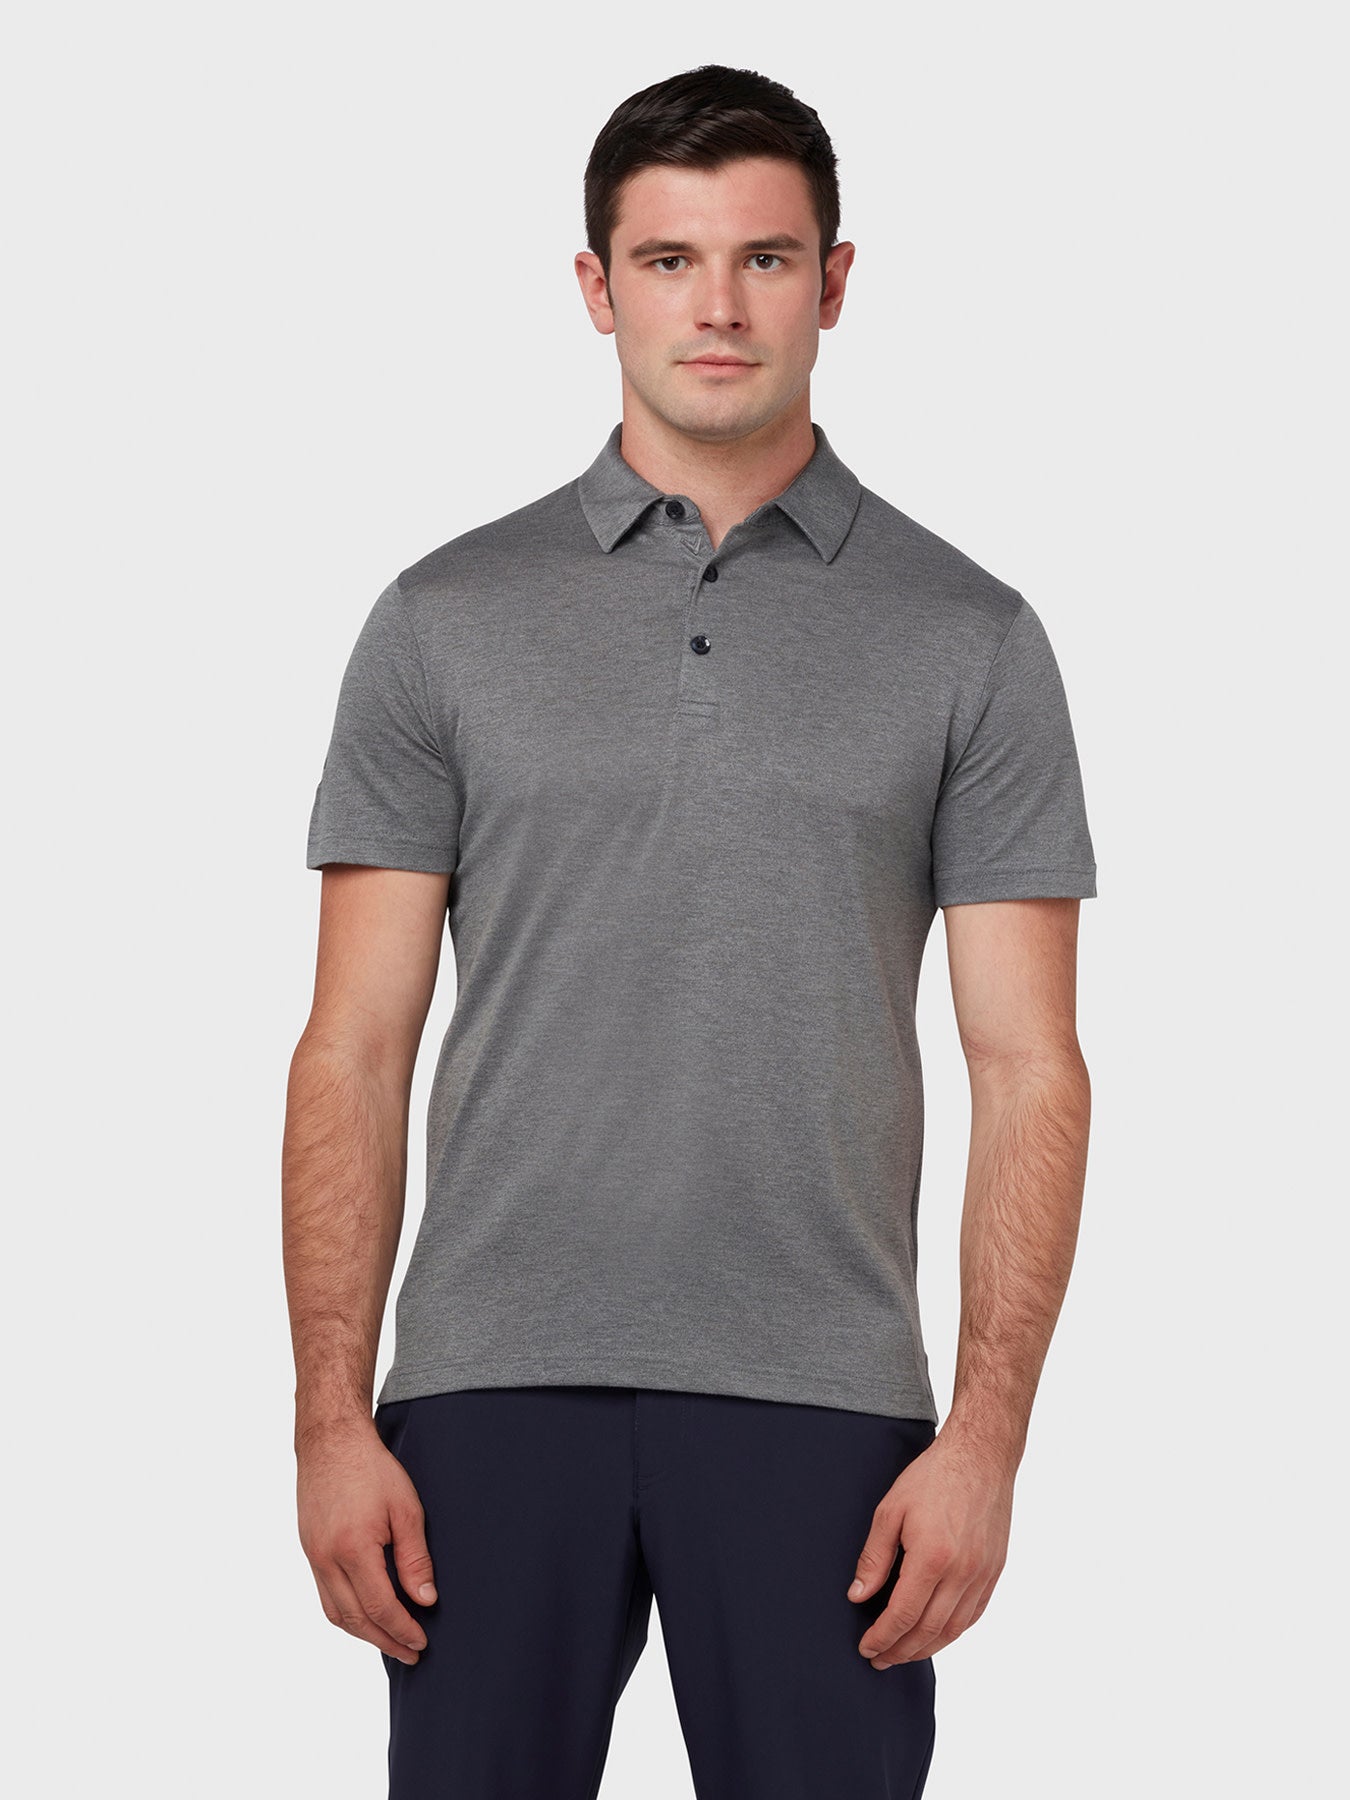 View Soft Touch Solid Polo In Black Heather Black Heather XXXL information